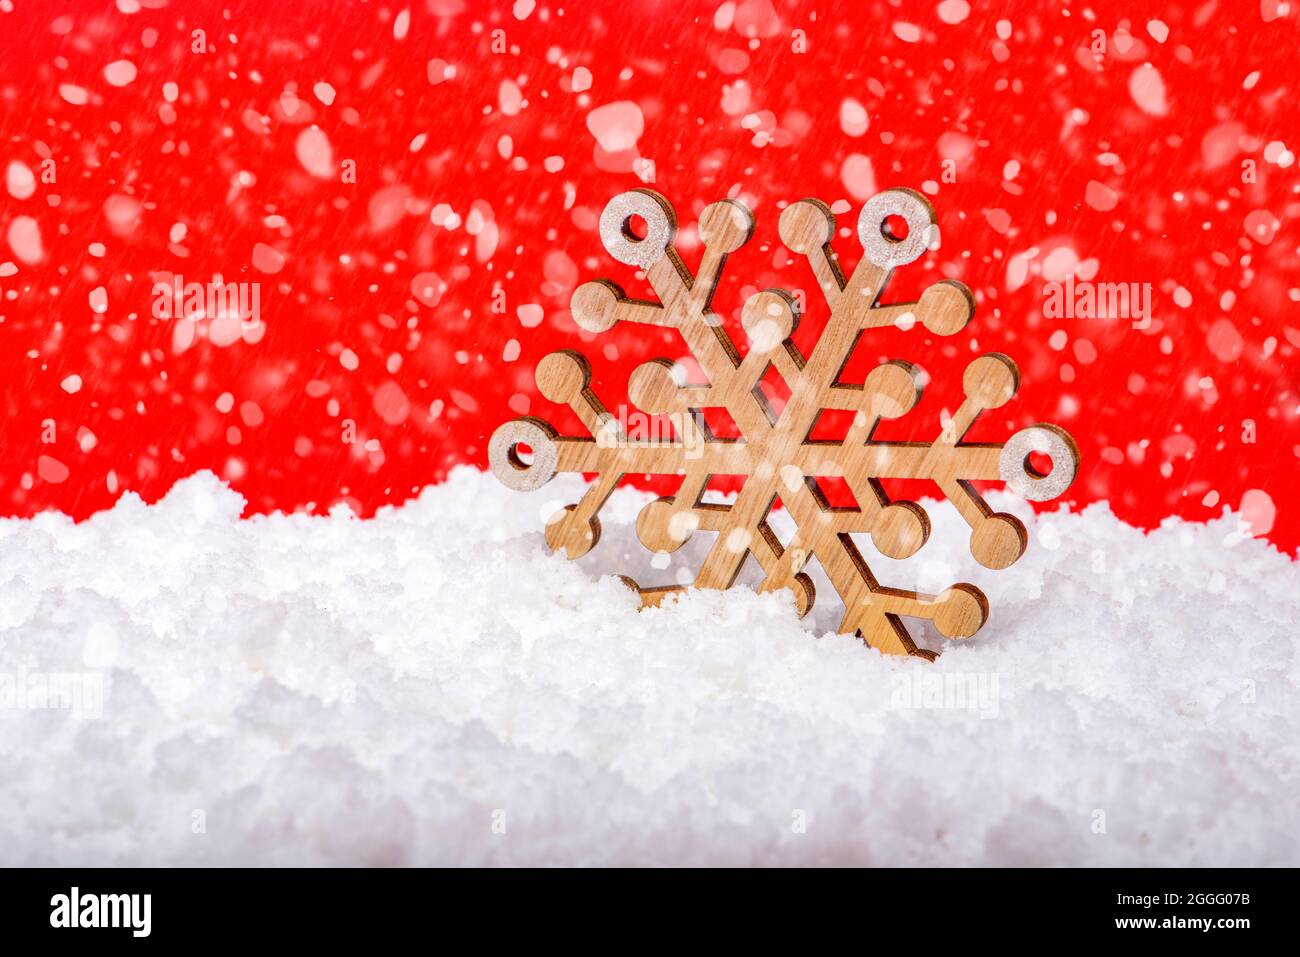 Snow on a red background, snowfall or falling snow. Large wooden snowflake in the snow. Christmas concept. New Year theme, panoramic photo for a Stock Photo